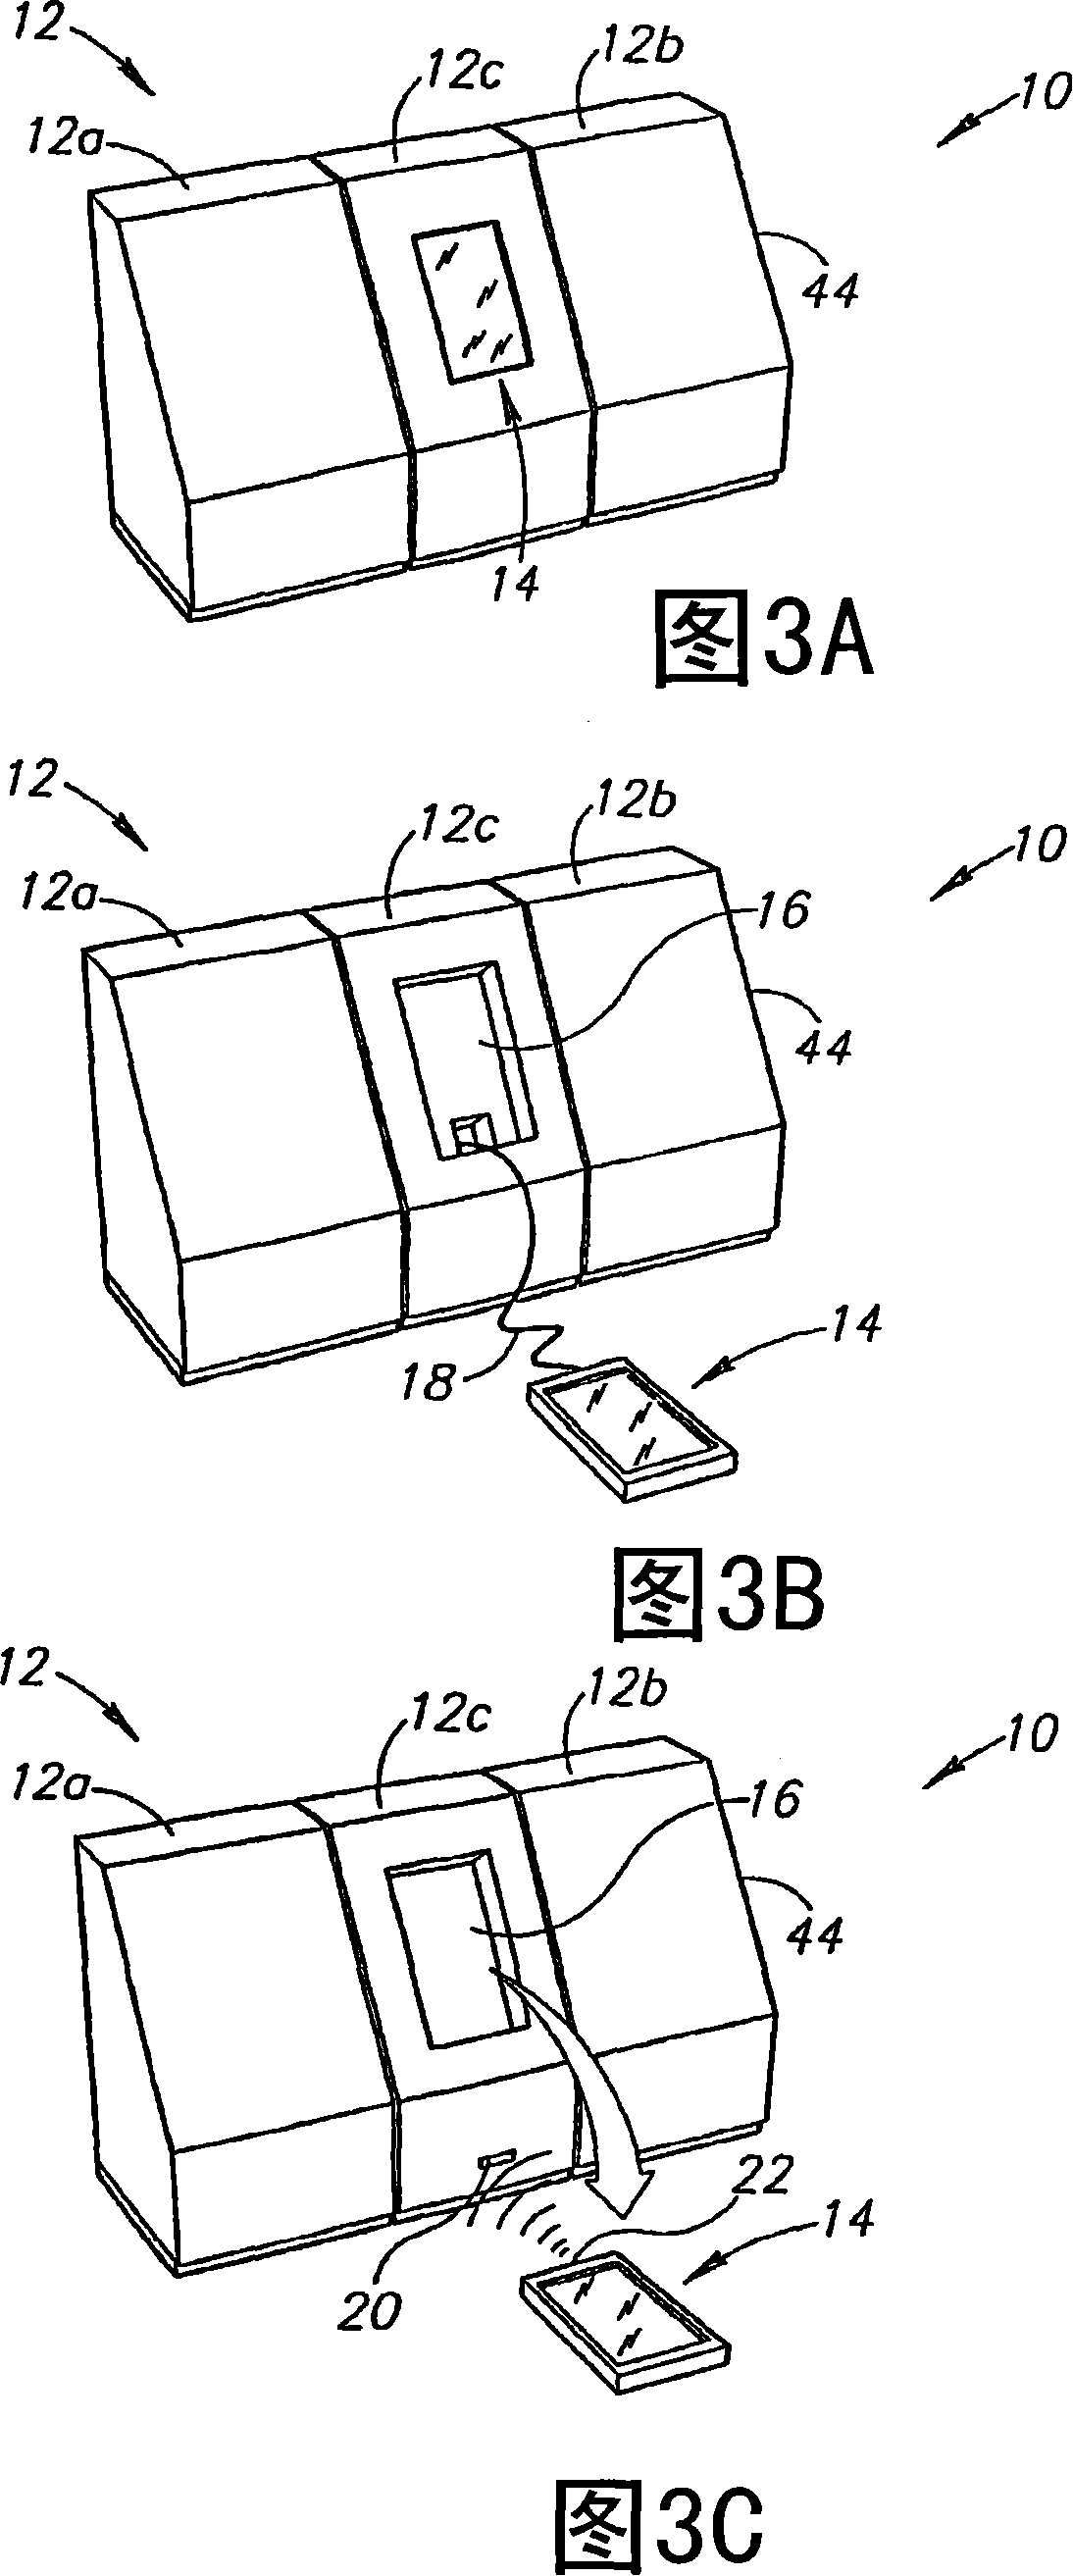 User interface for electronic devices